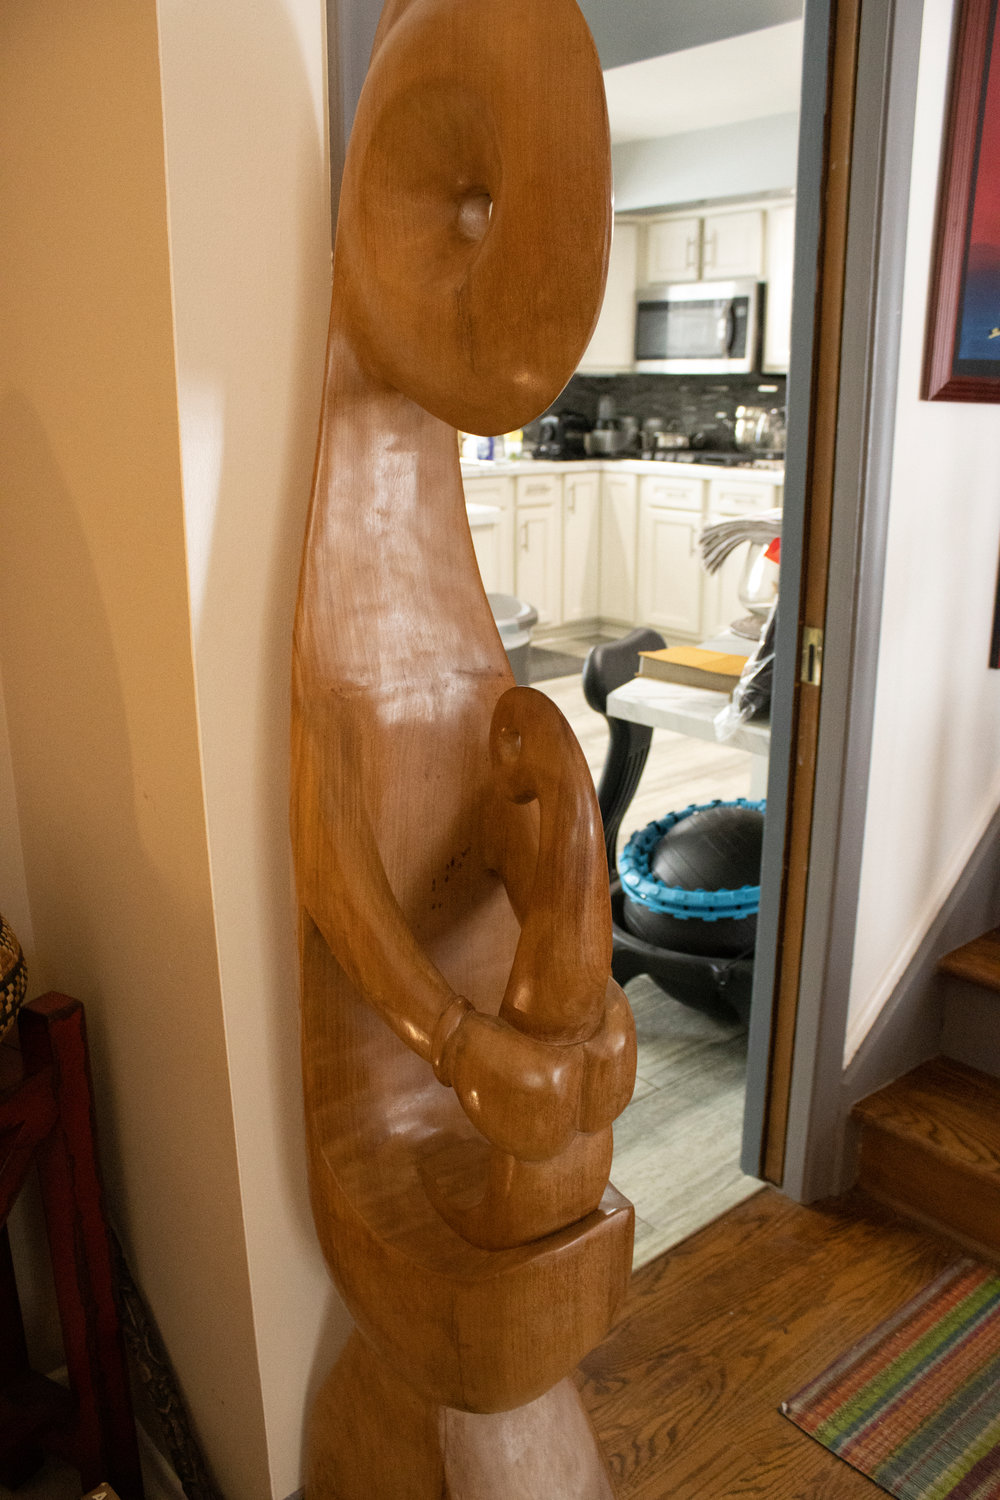 A Shona unity sculpture in Eugene Cain’s home.